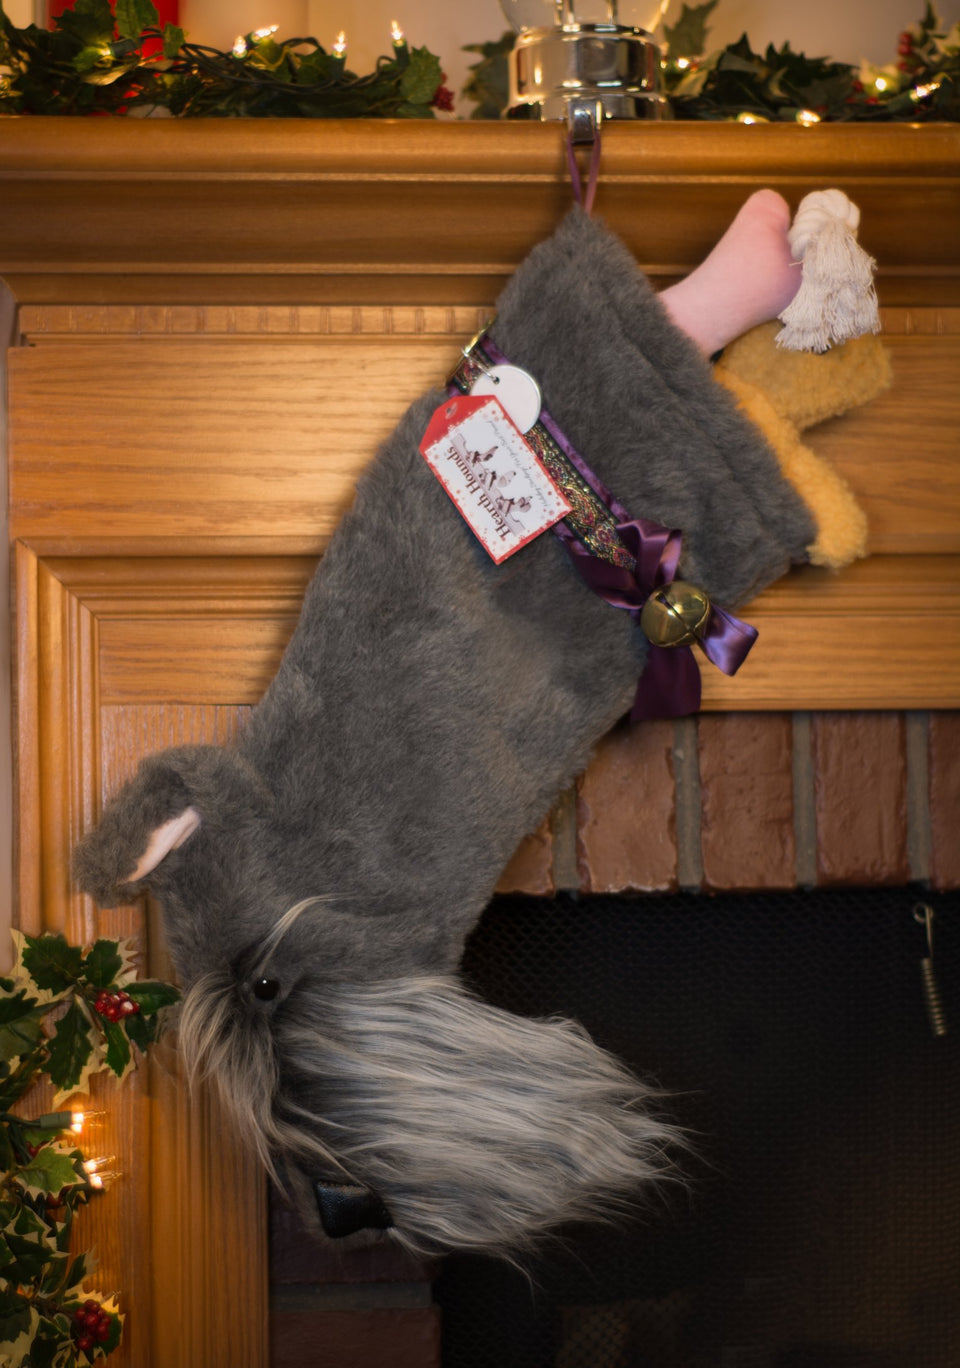 This Schnauzer shaped Christmas dog stocking is the perfect gift for stuffing toys and treats into to spoil your fur baby for Christmas, or whatever holiday you celebrate!